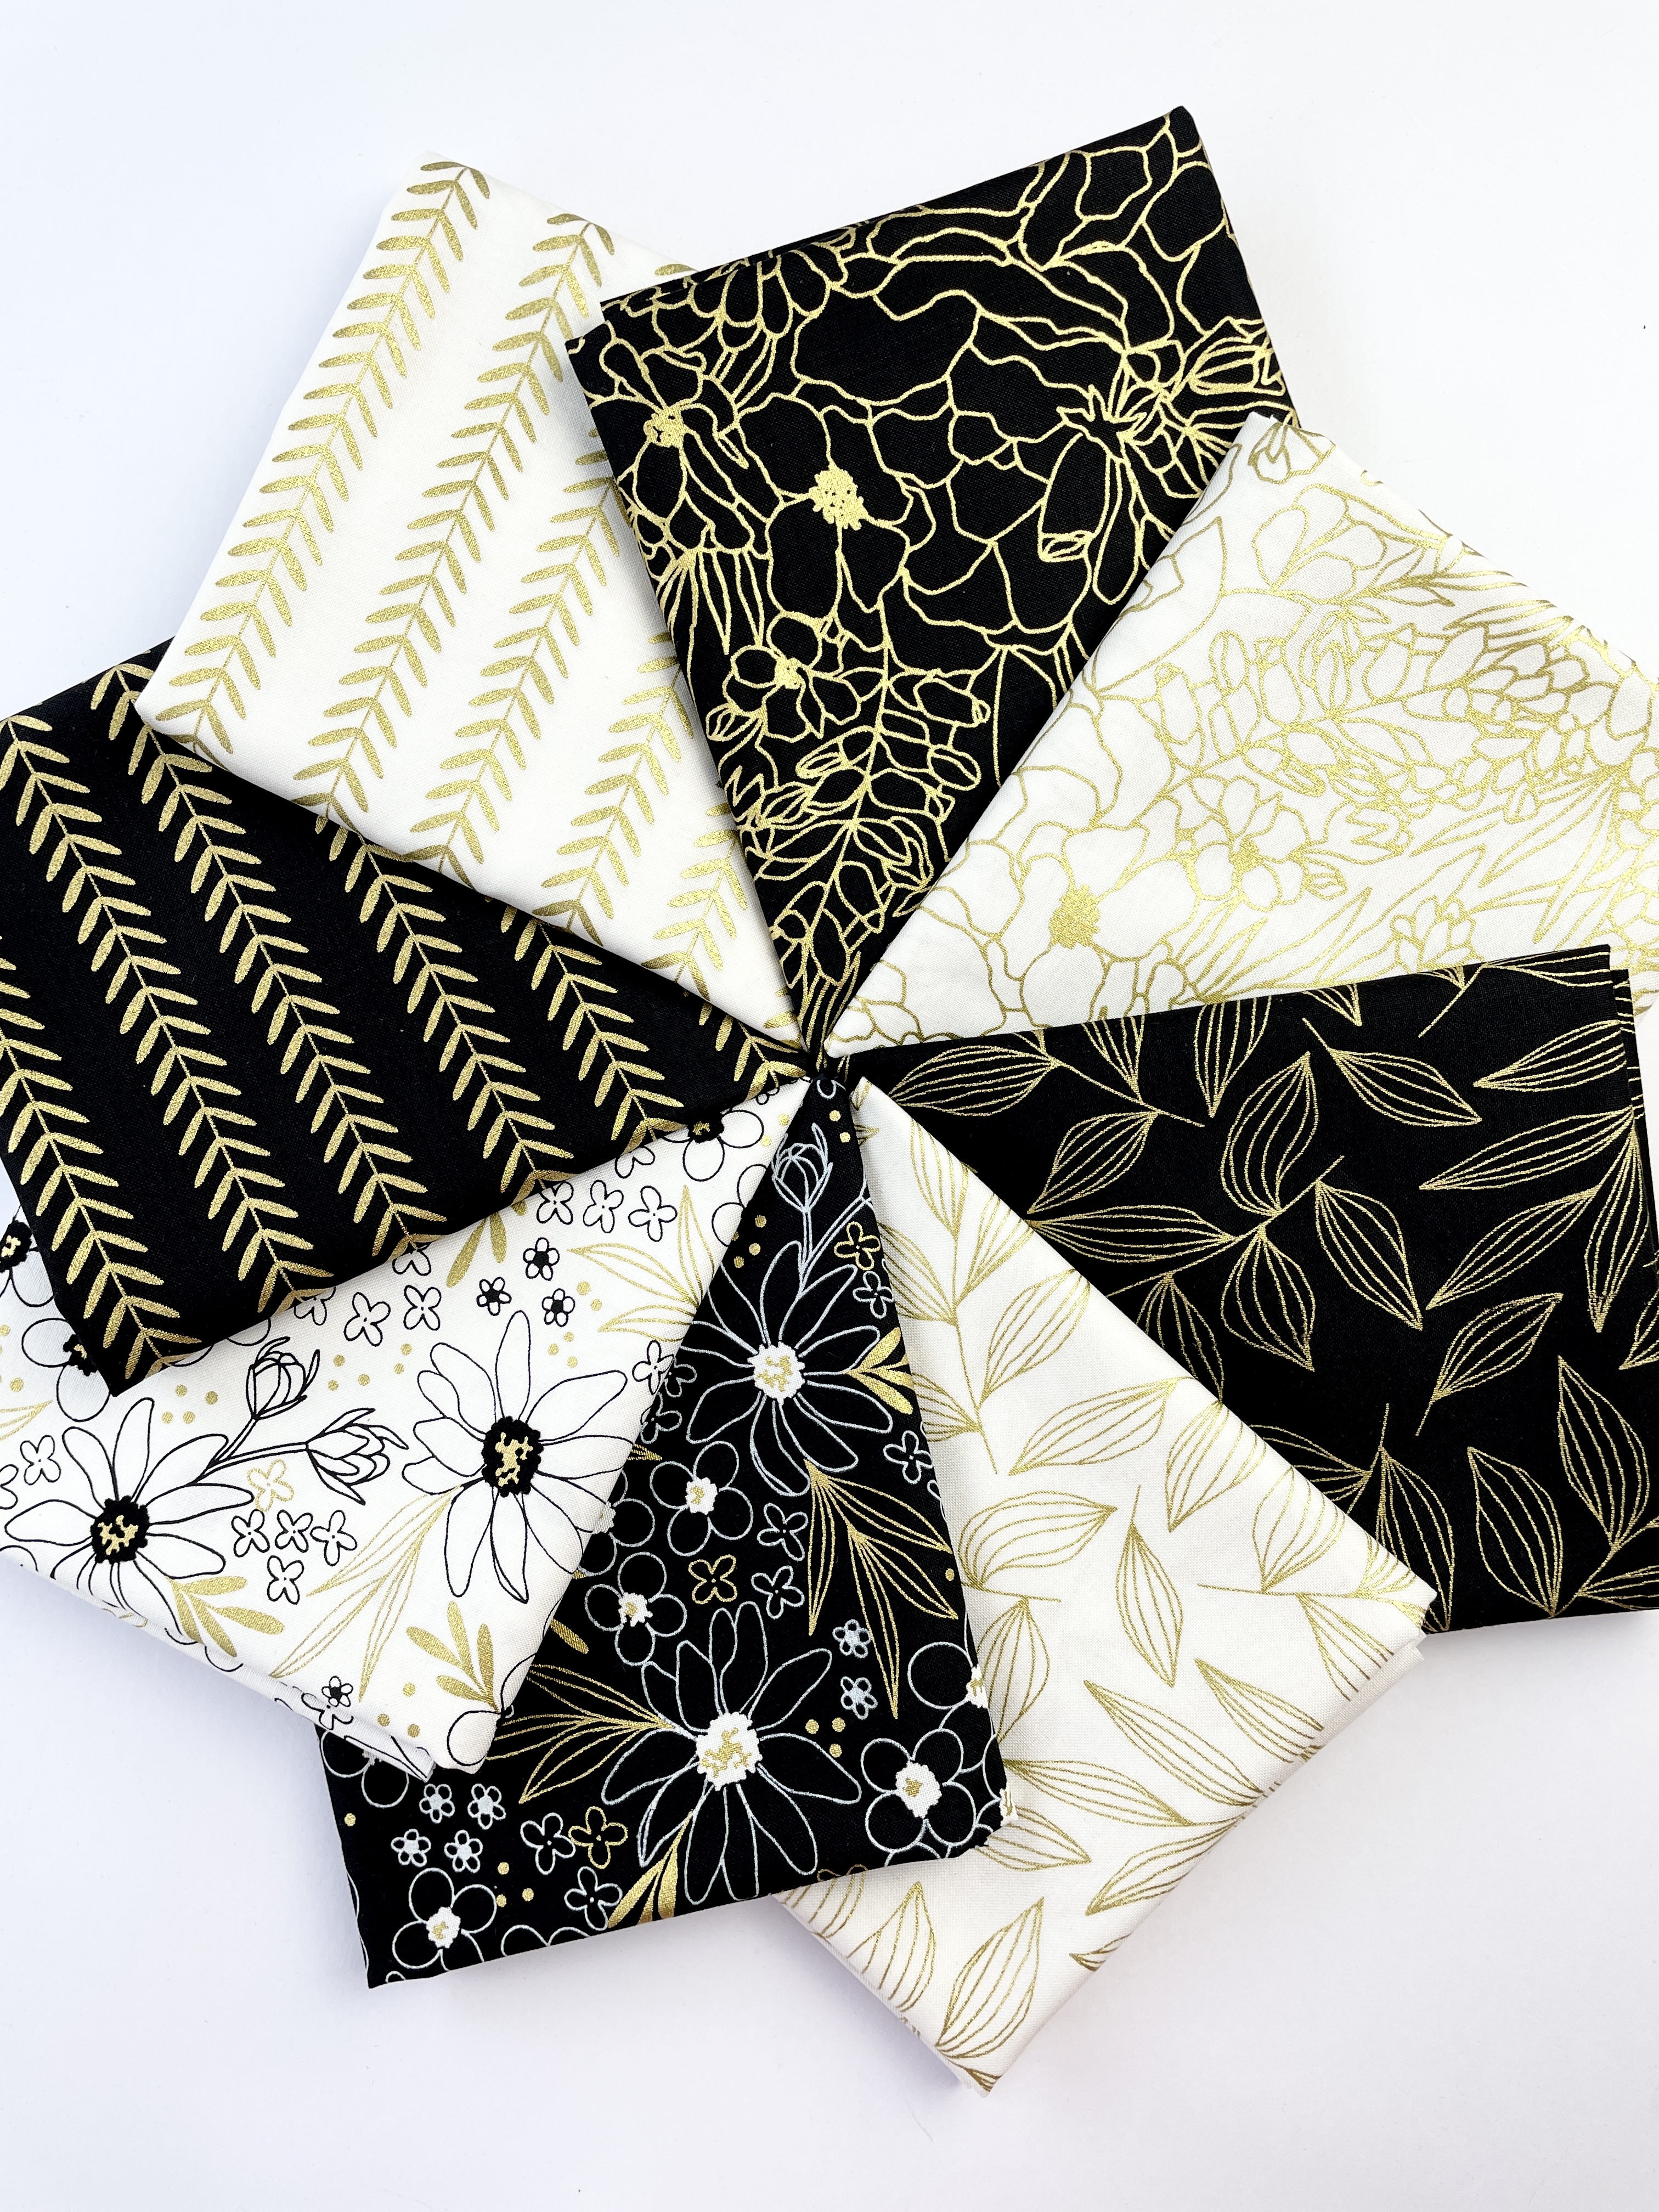 Modern quilting and patchwork fabric from the Gilded collection designed by Alli K Design for Moda Fabrics